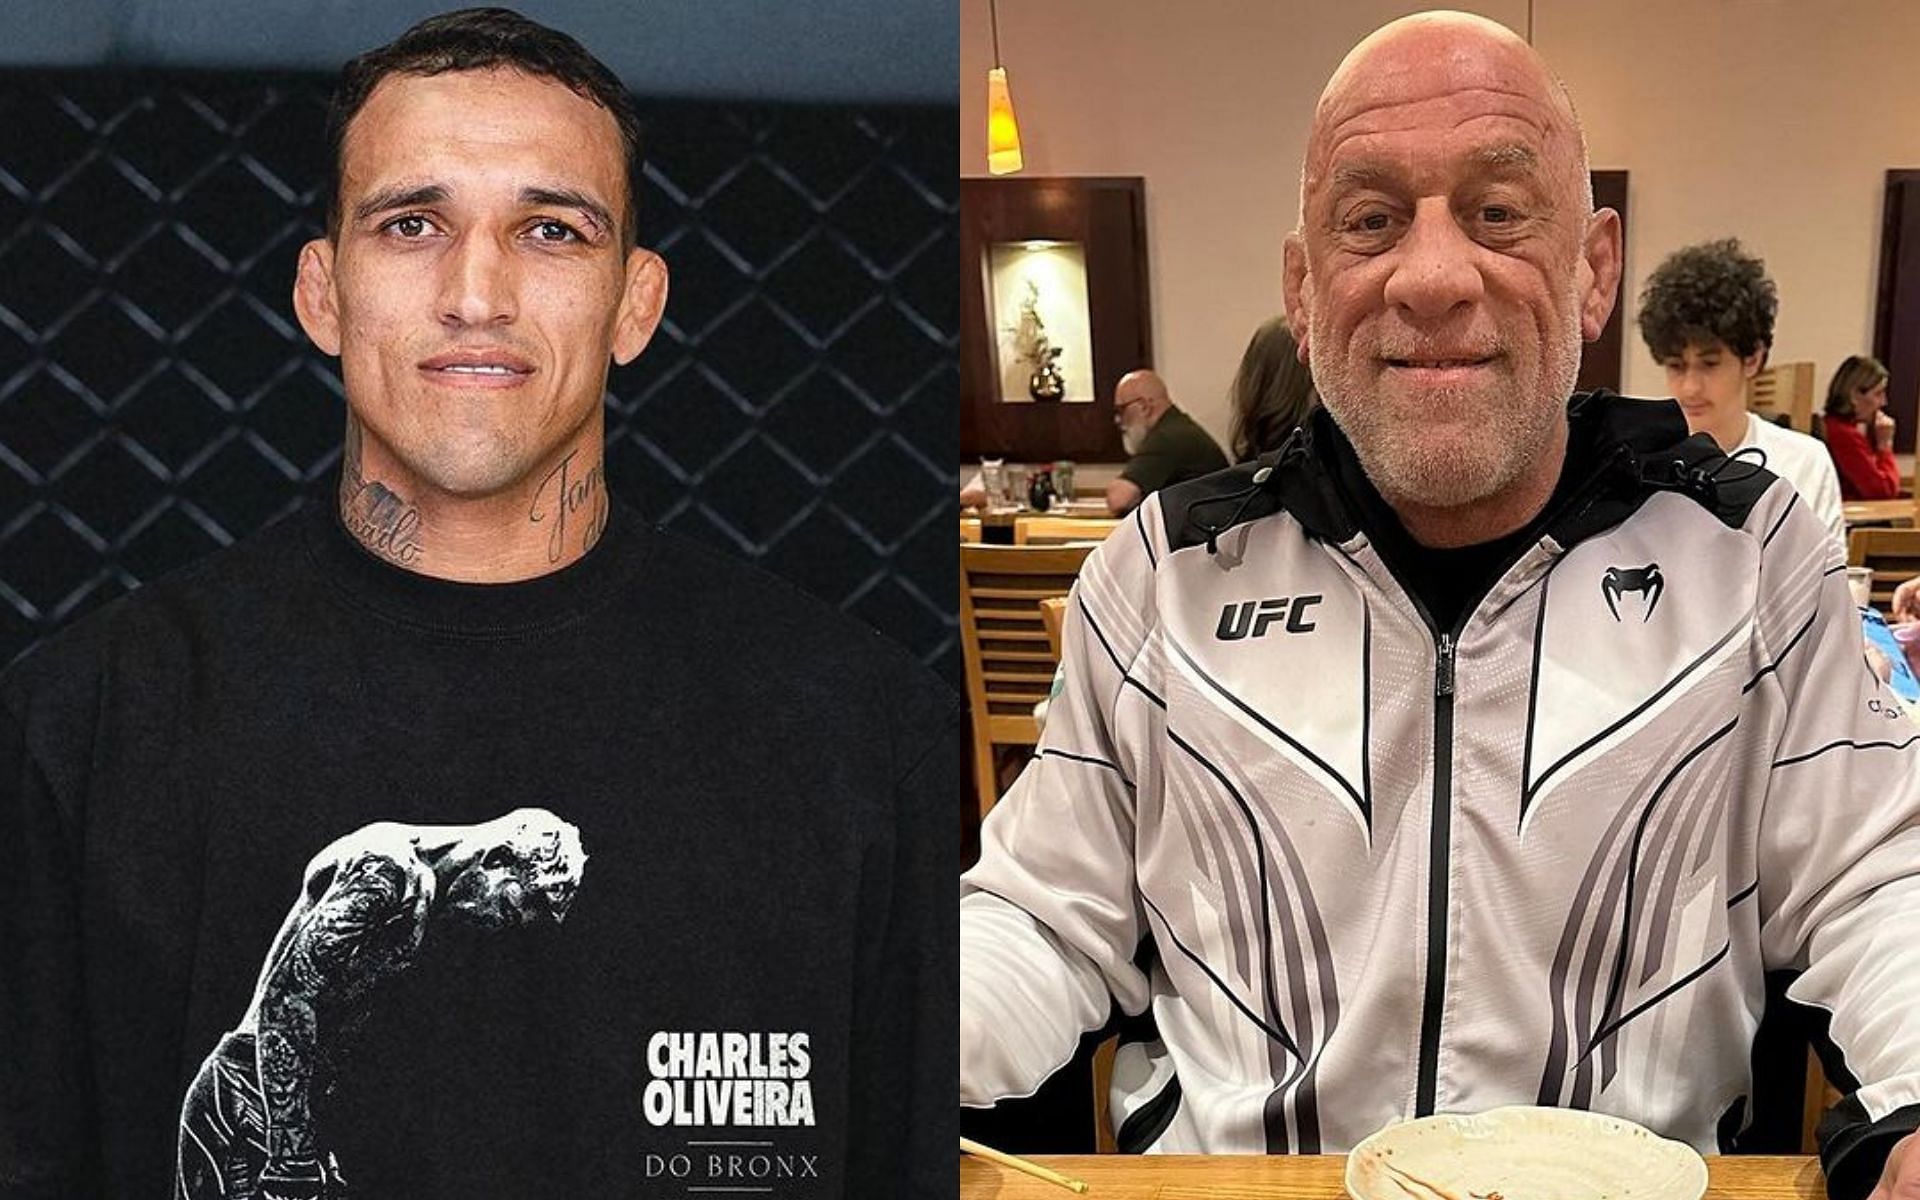 Charles Oliveira (left) sends a heartwarming message to Mark Coleman (right) [Images courtesy @charlesdobronx and @markcolemanufc on Instagram]